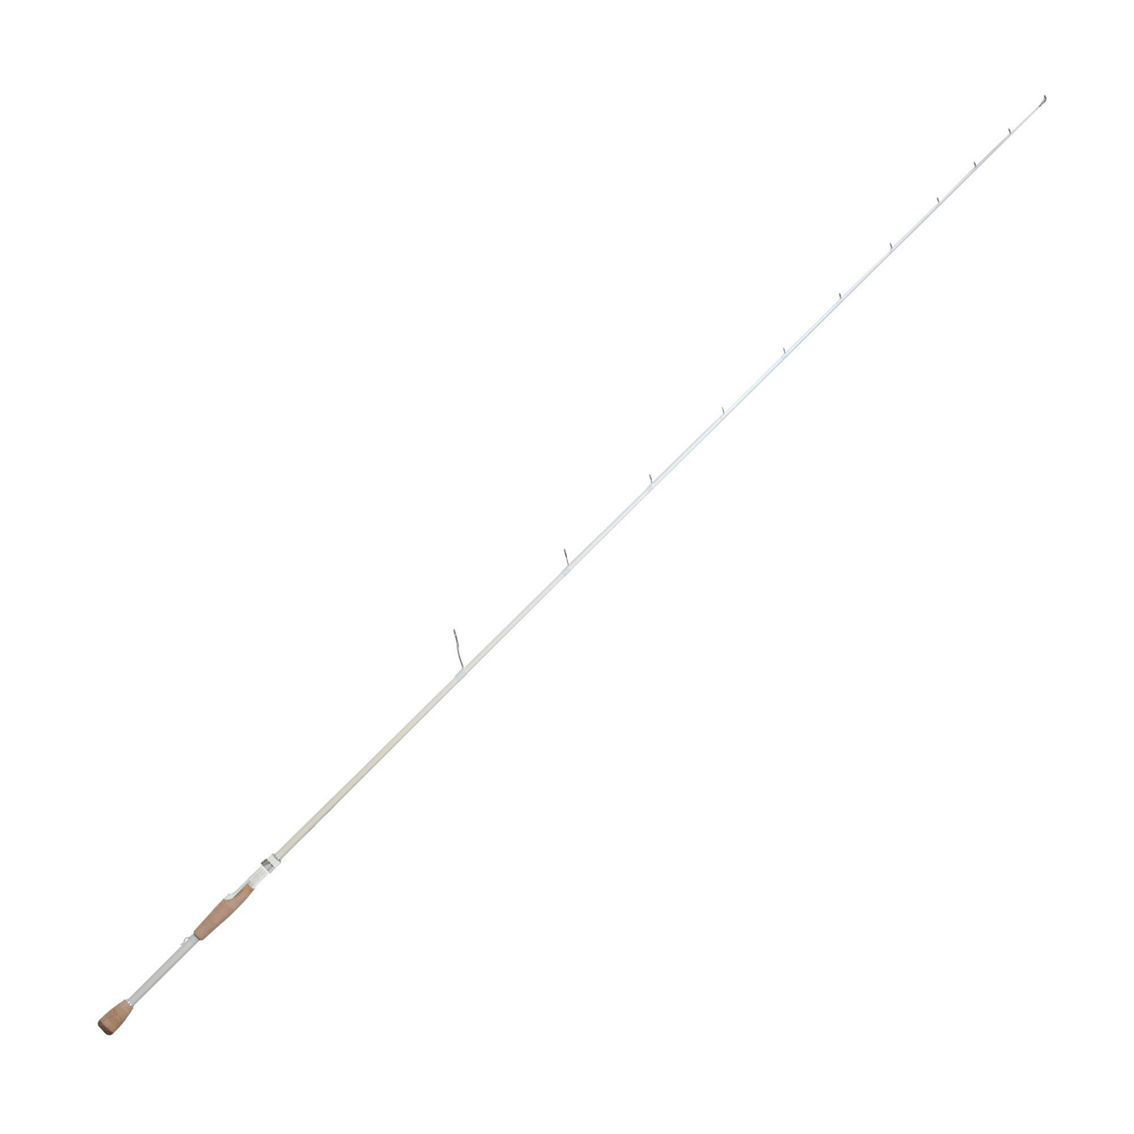 Duckett Fishing Pro Series 7'11 H Casting Rod, Fly Fishing Rods & Reels, Sports & Outdoors